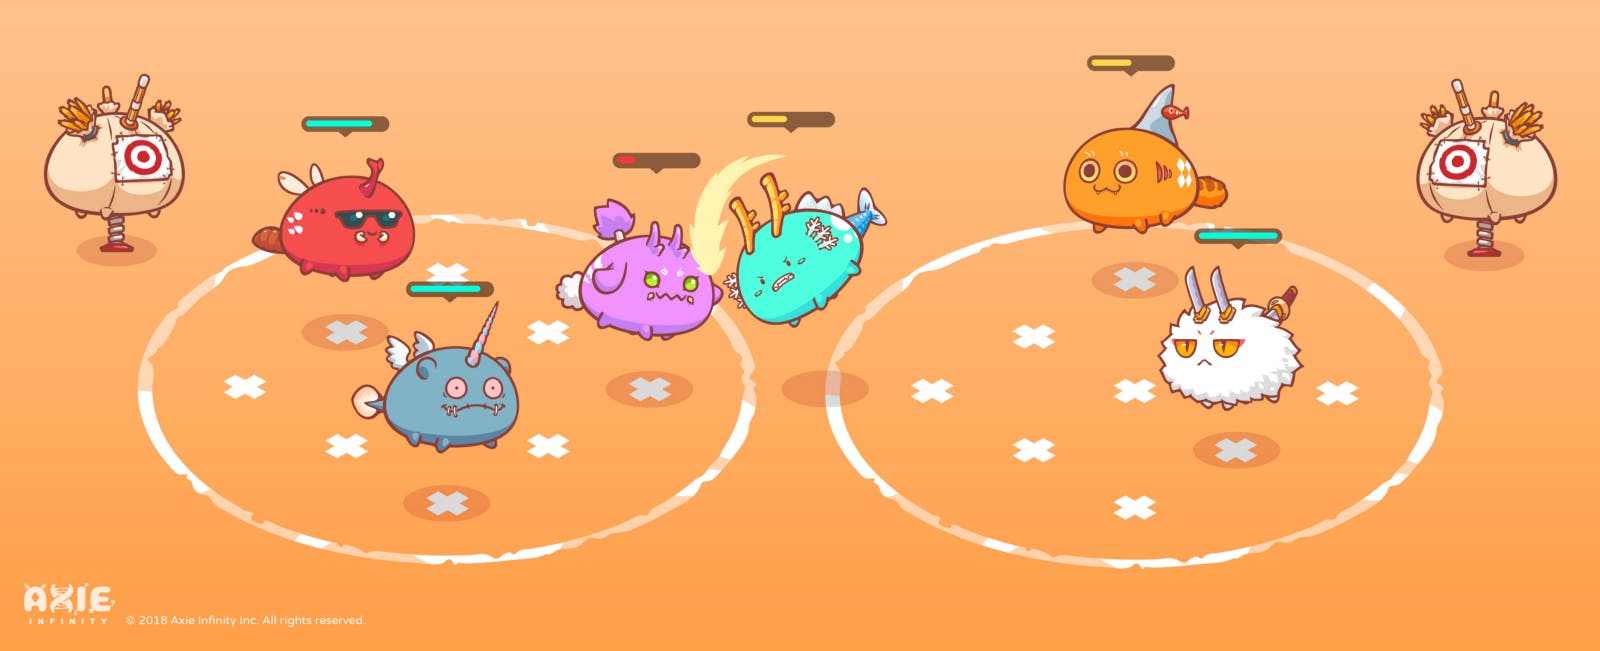 featured image - Axie Infinity: Pets for the Digital Age